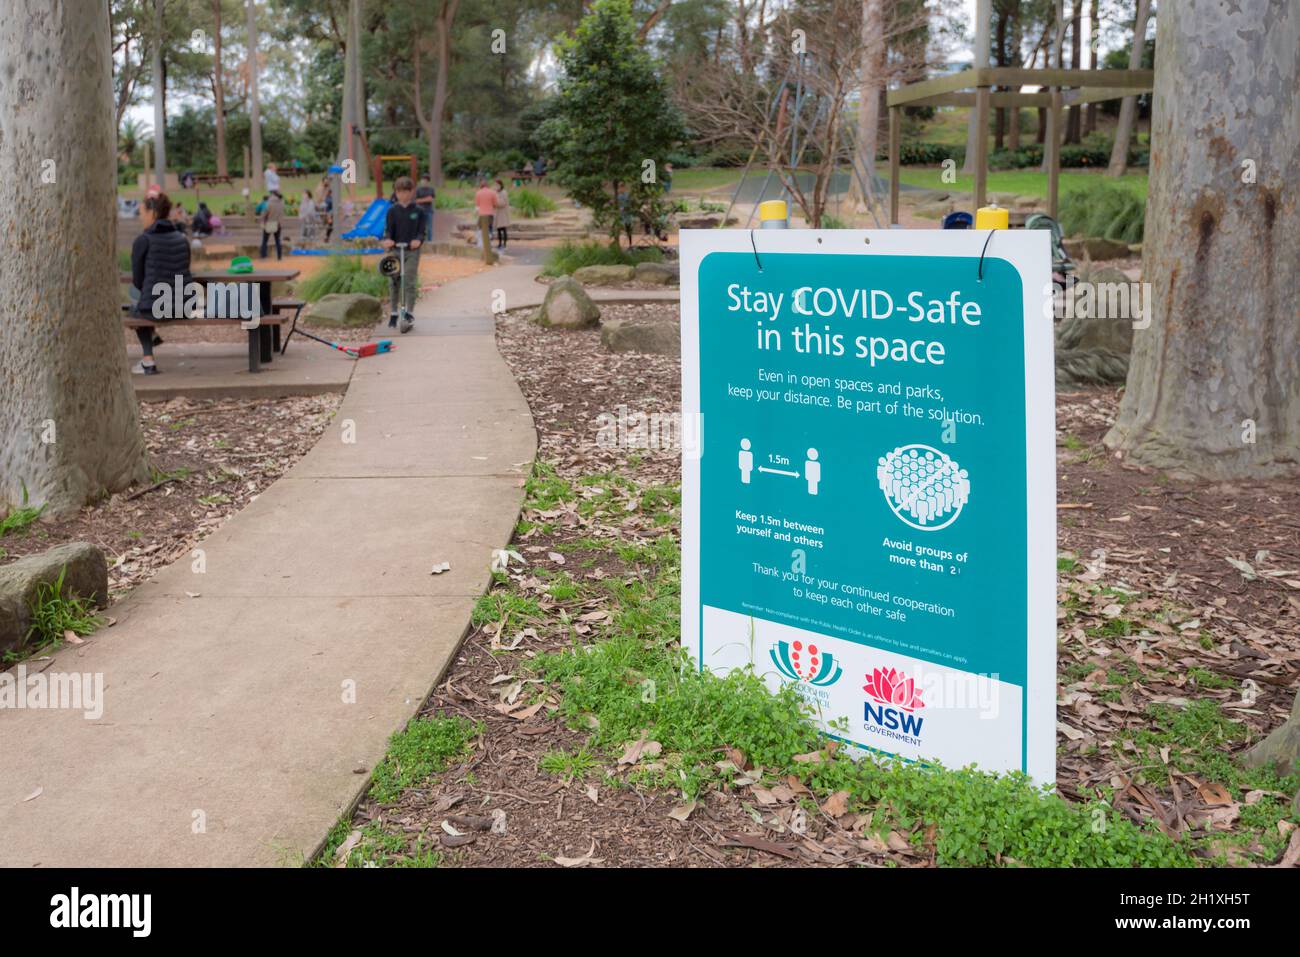 A sign in a Sydney park in the suburb of Roseville, warning people to stay Covid Safe by staying 1.5 metres apart Stock Photo